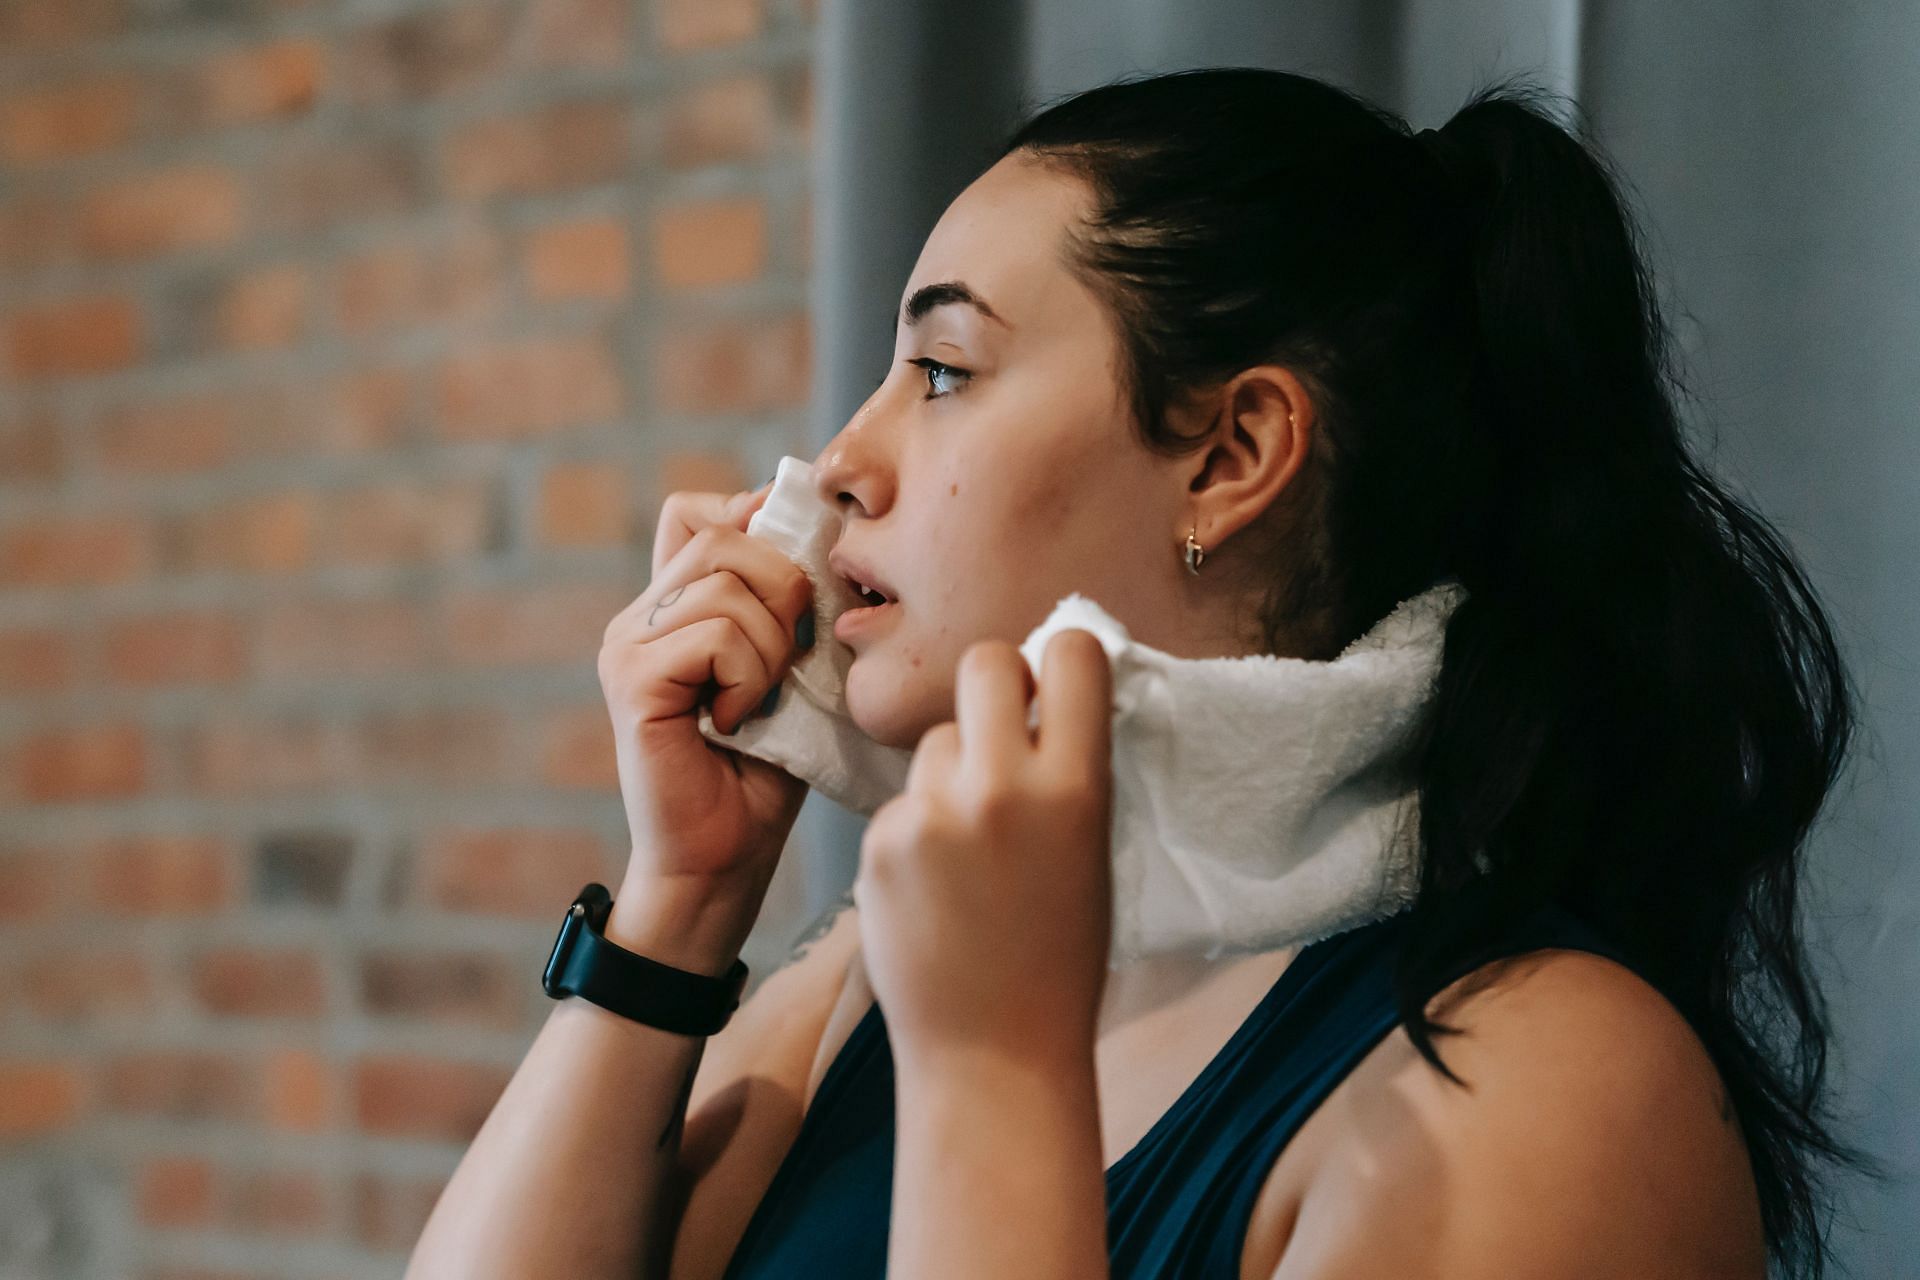 Sweating helps your skin look healthier and cleaner! (Image via pexels/Andres Ayrton)